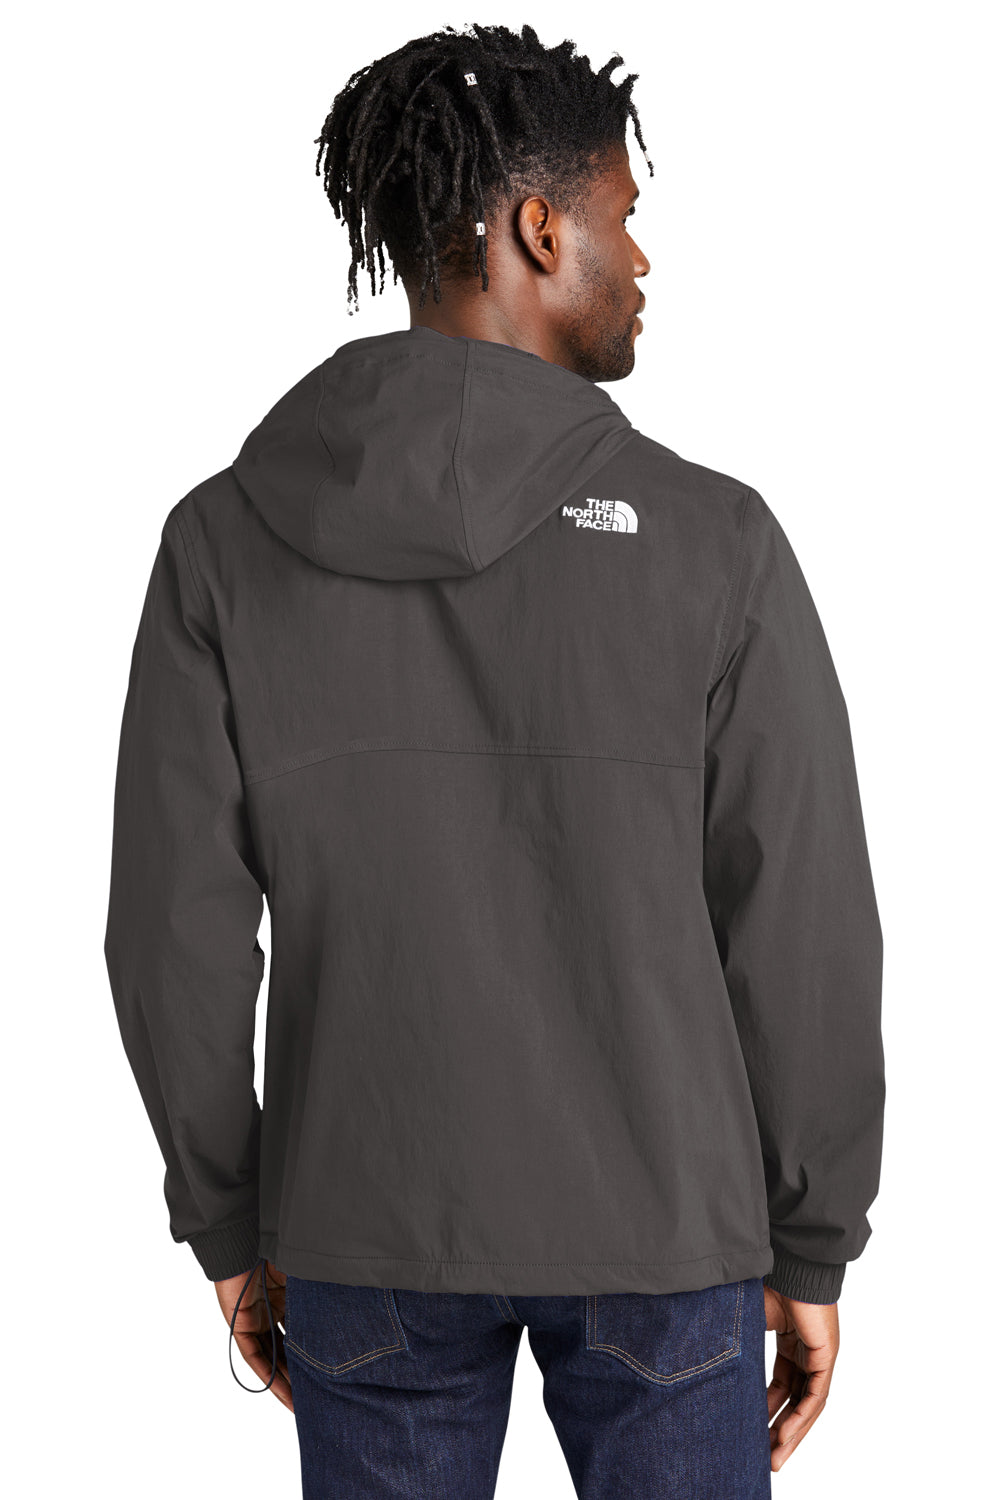 The North Face NF0A5IRW Packable Travel Anorak Hooded Jacket Asphalt Grey Back